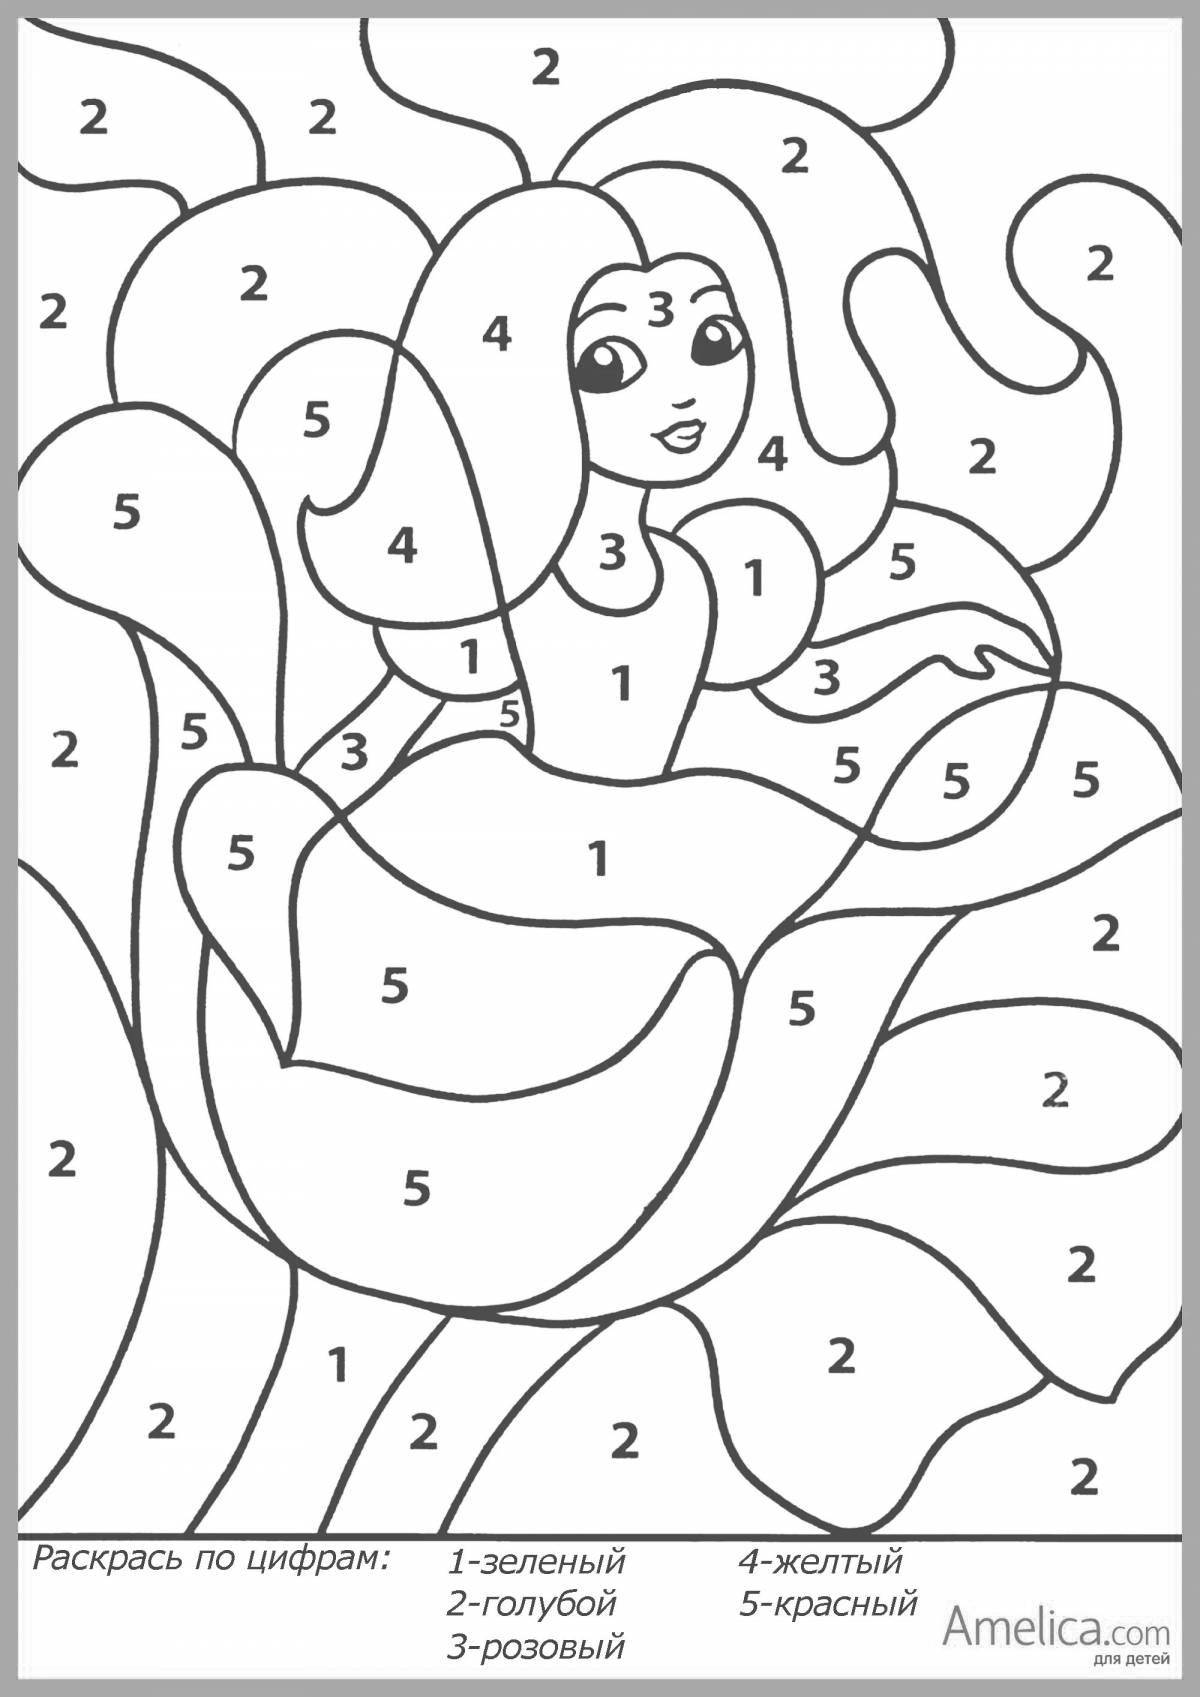 Colourful children's coloring by numbers